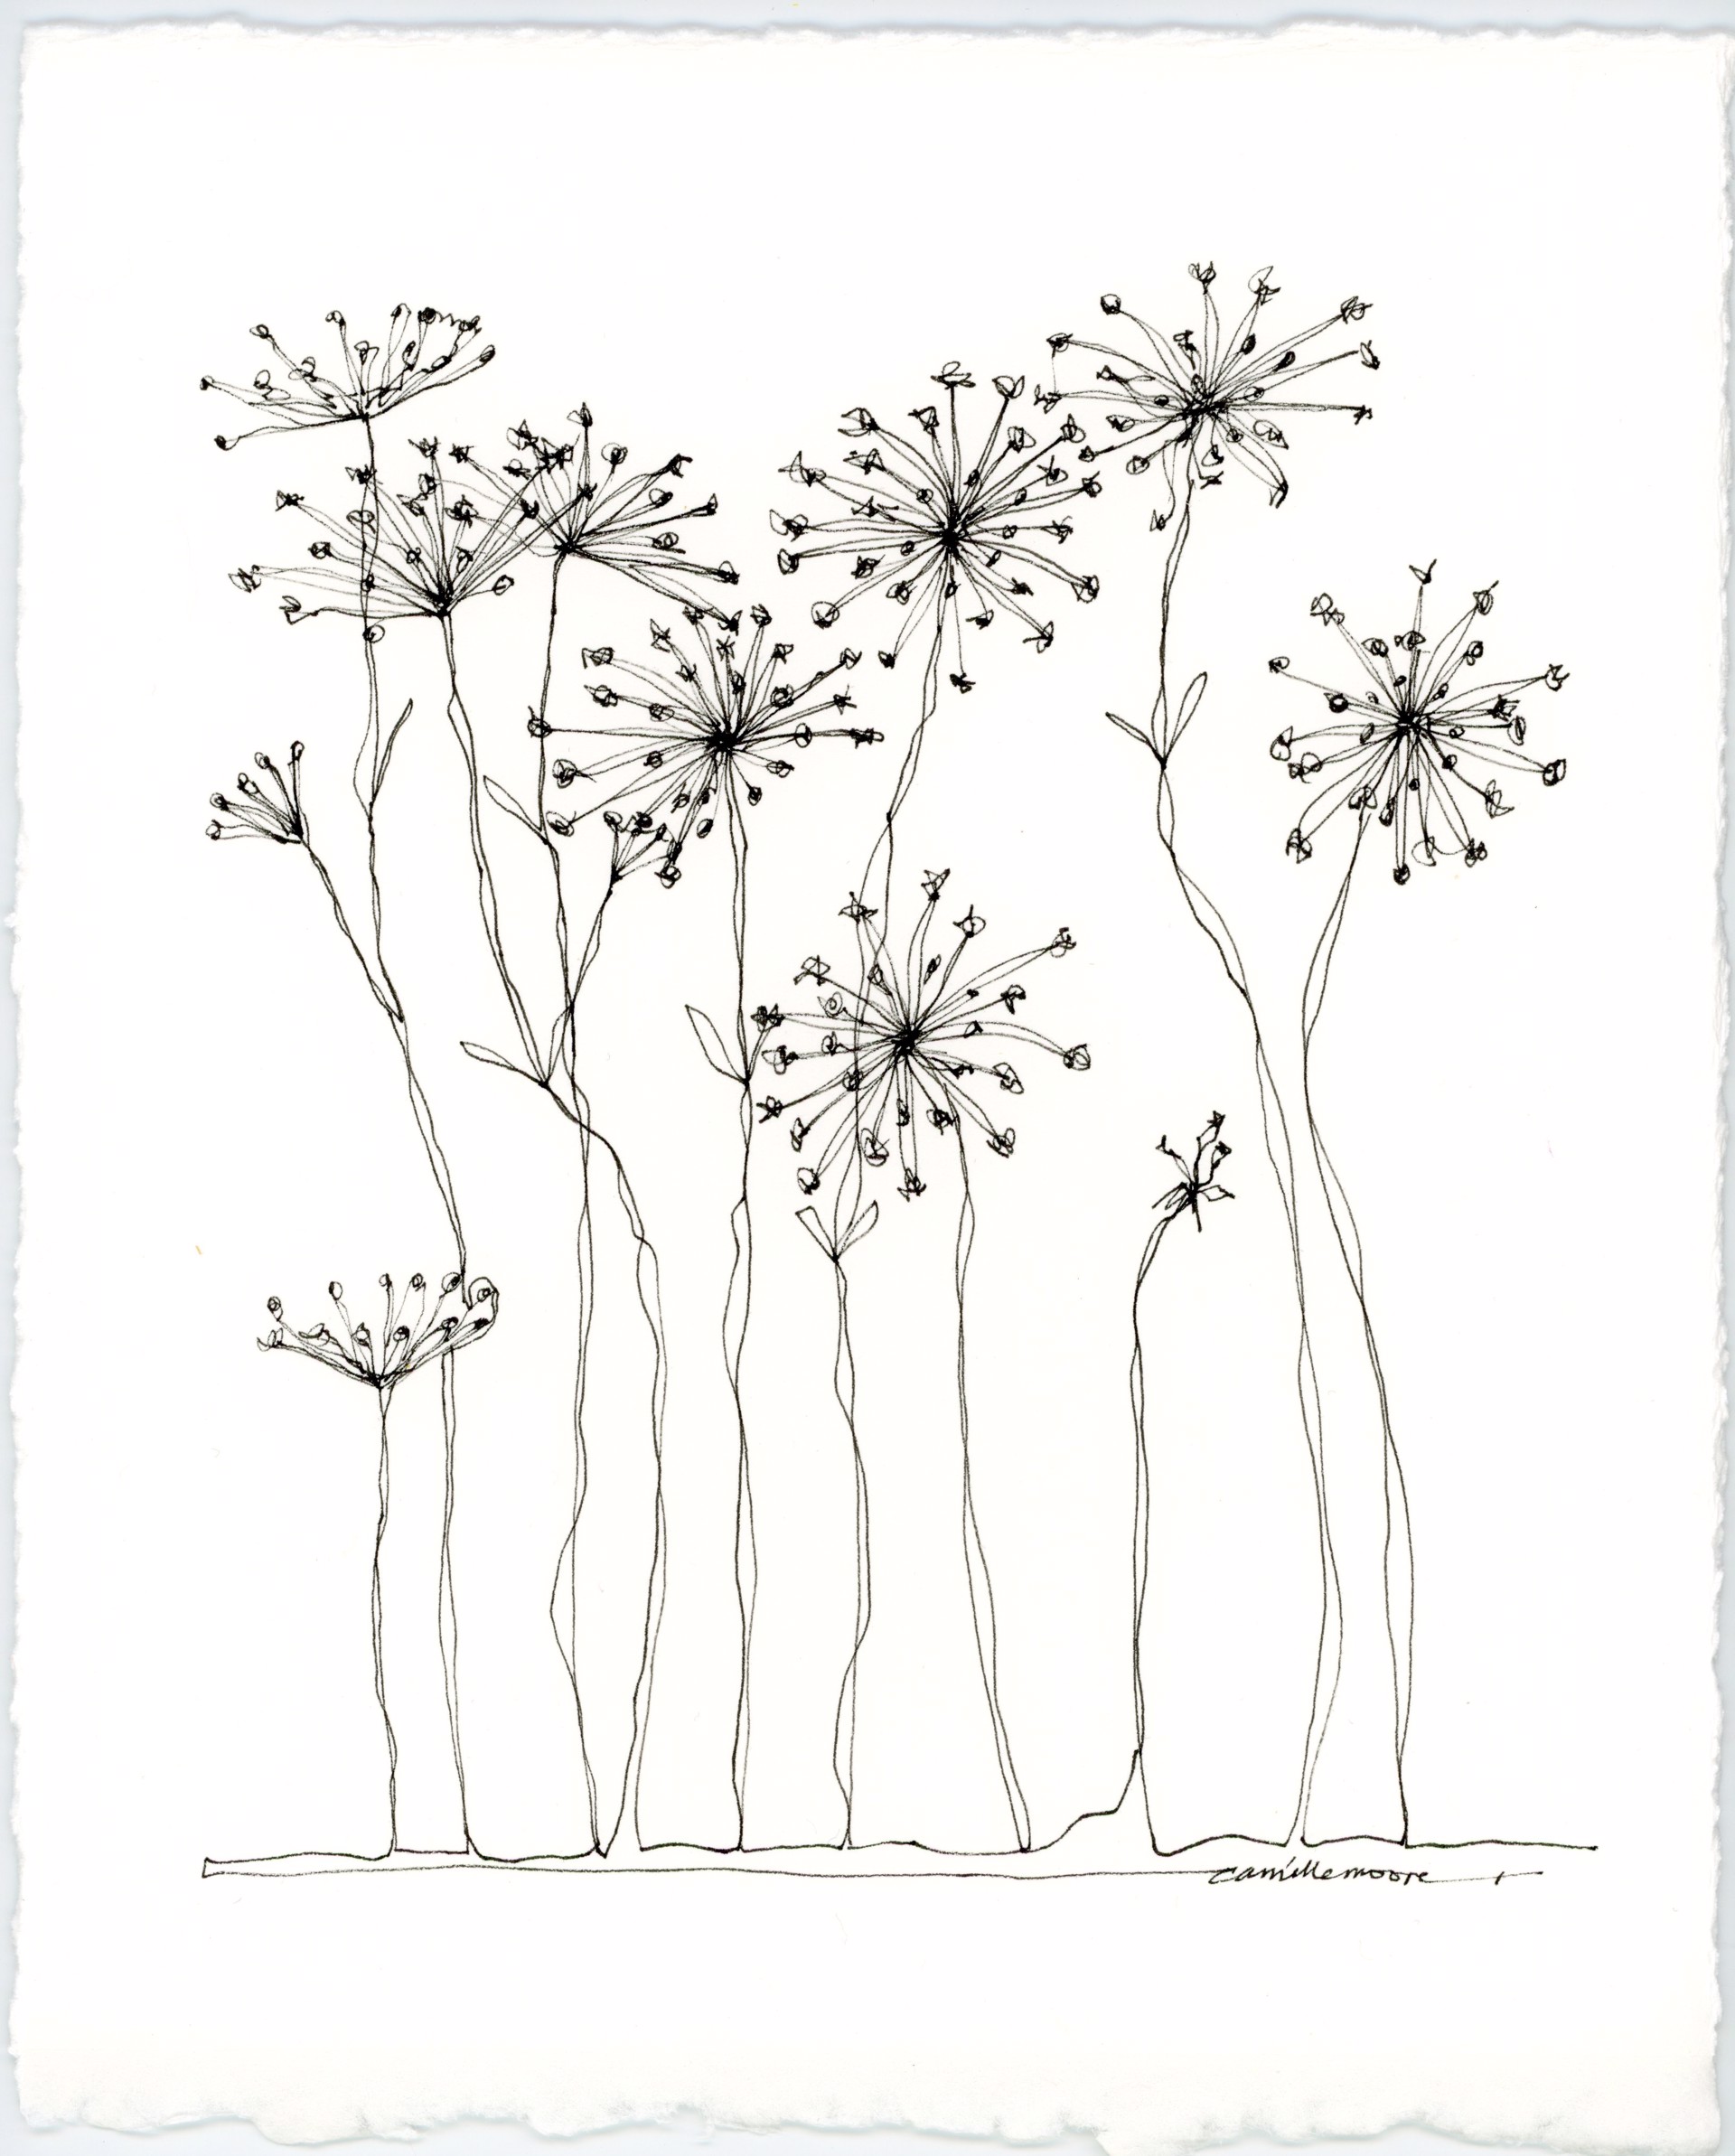 Queen Anne's Lace by Camille Moore